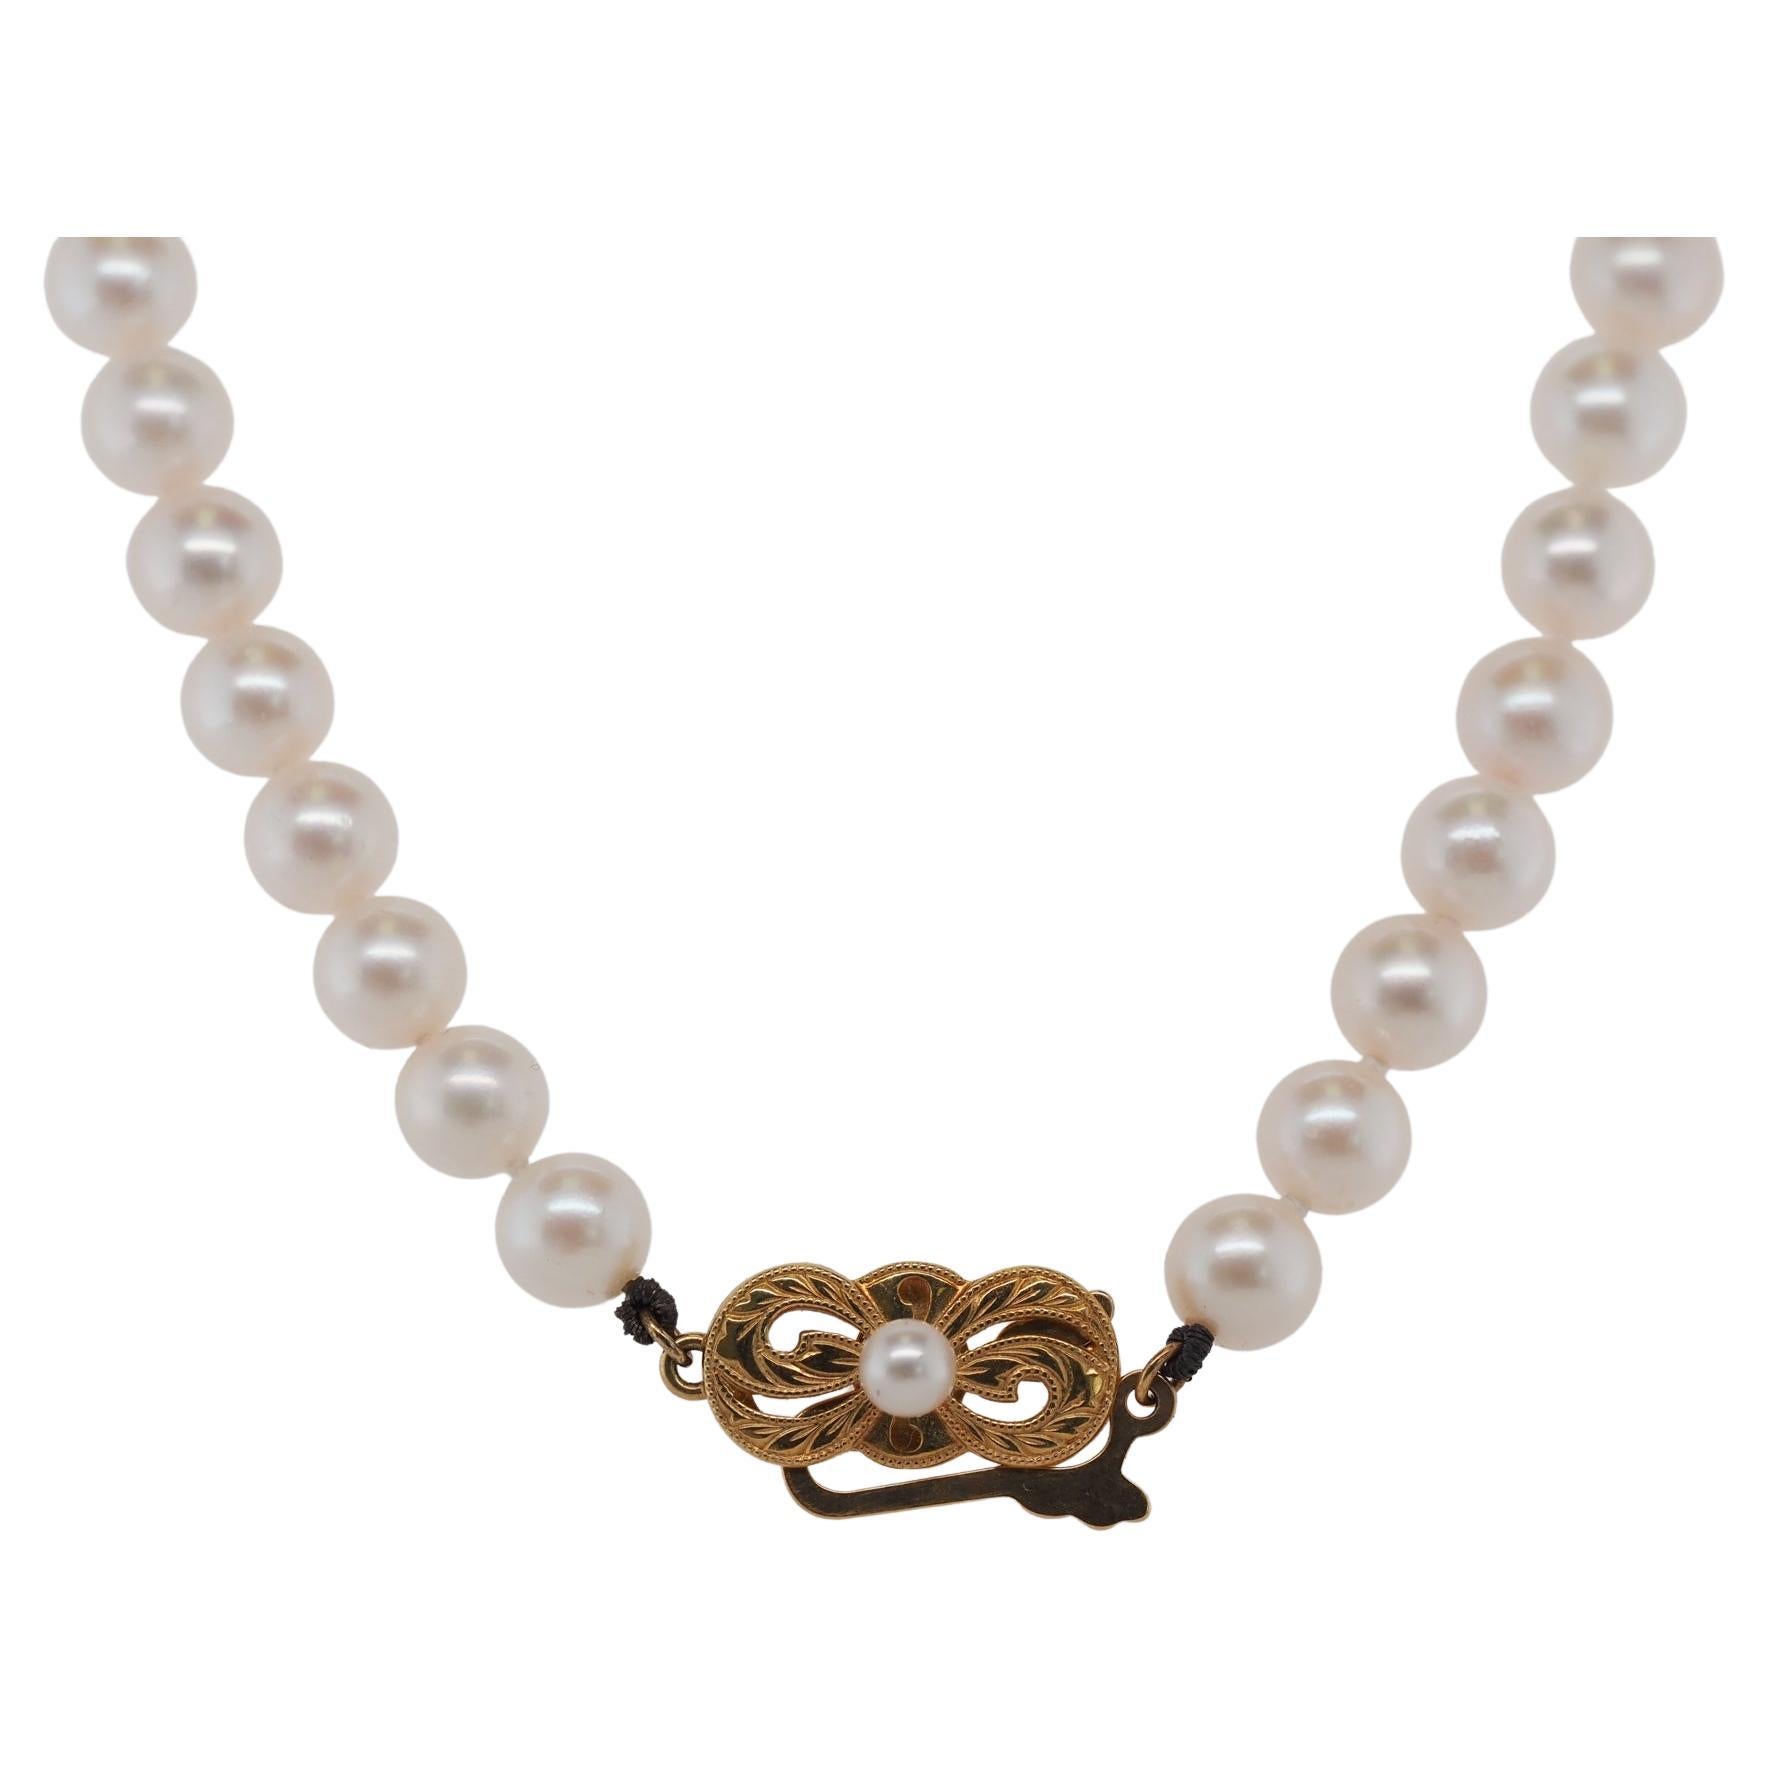 18k Yellow Gold and Pearl Necklace Strand with Certificate